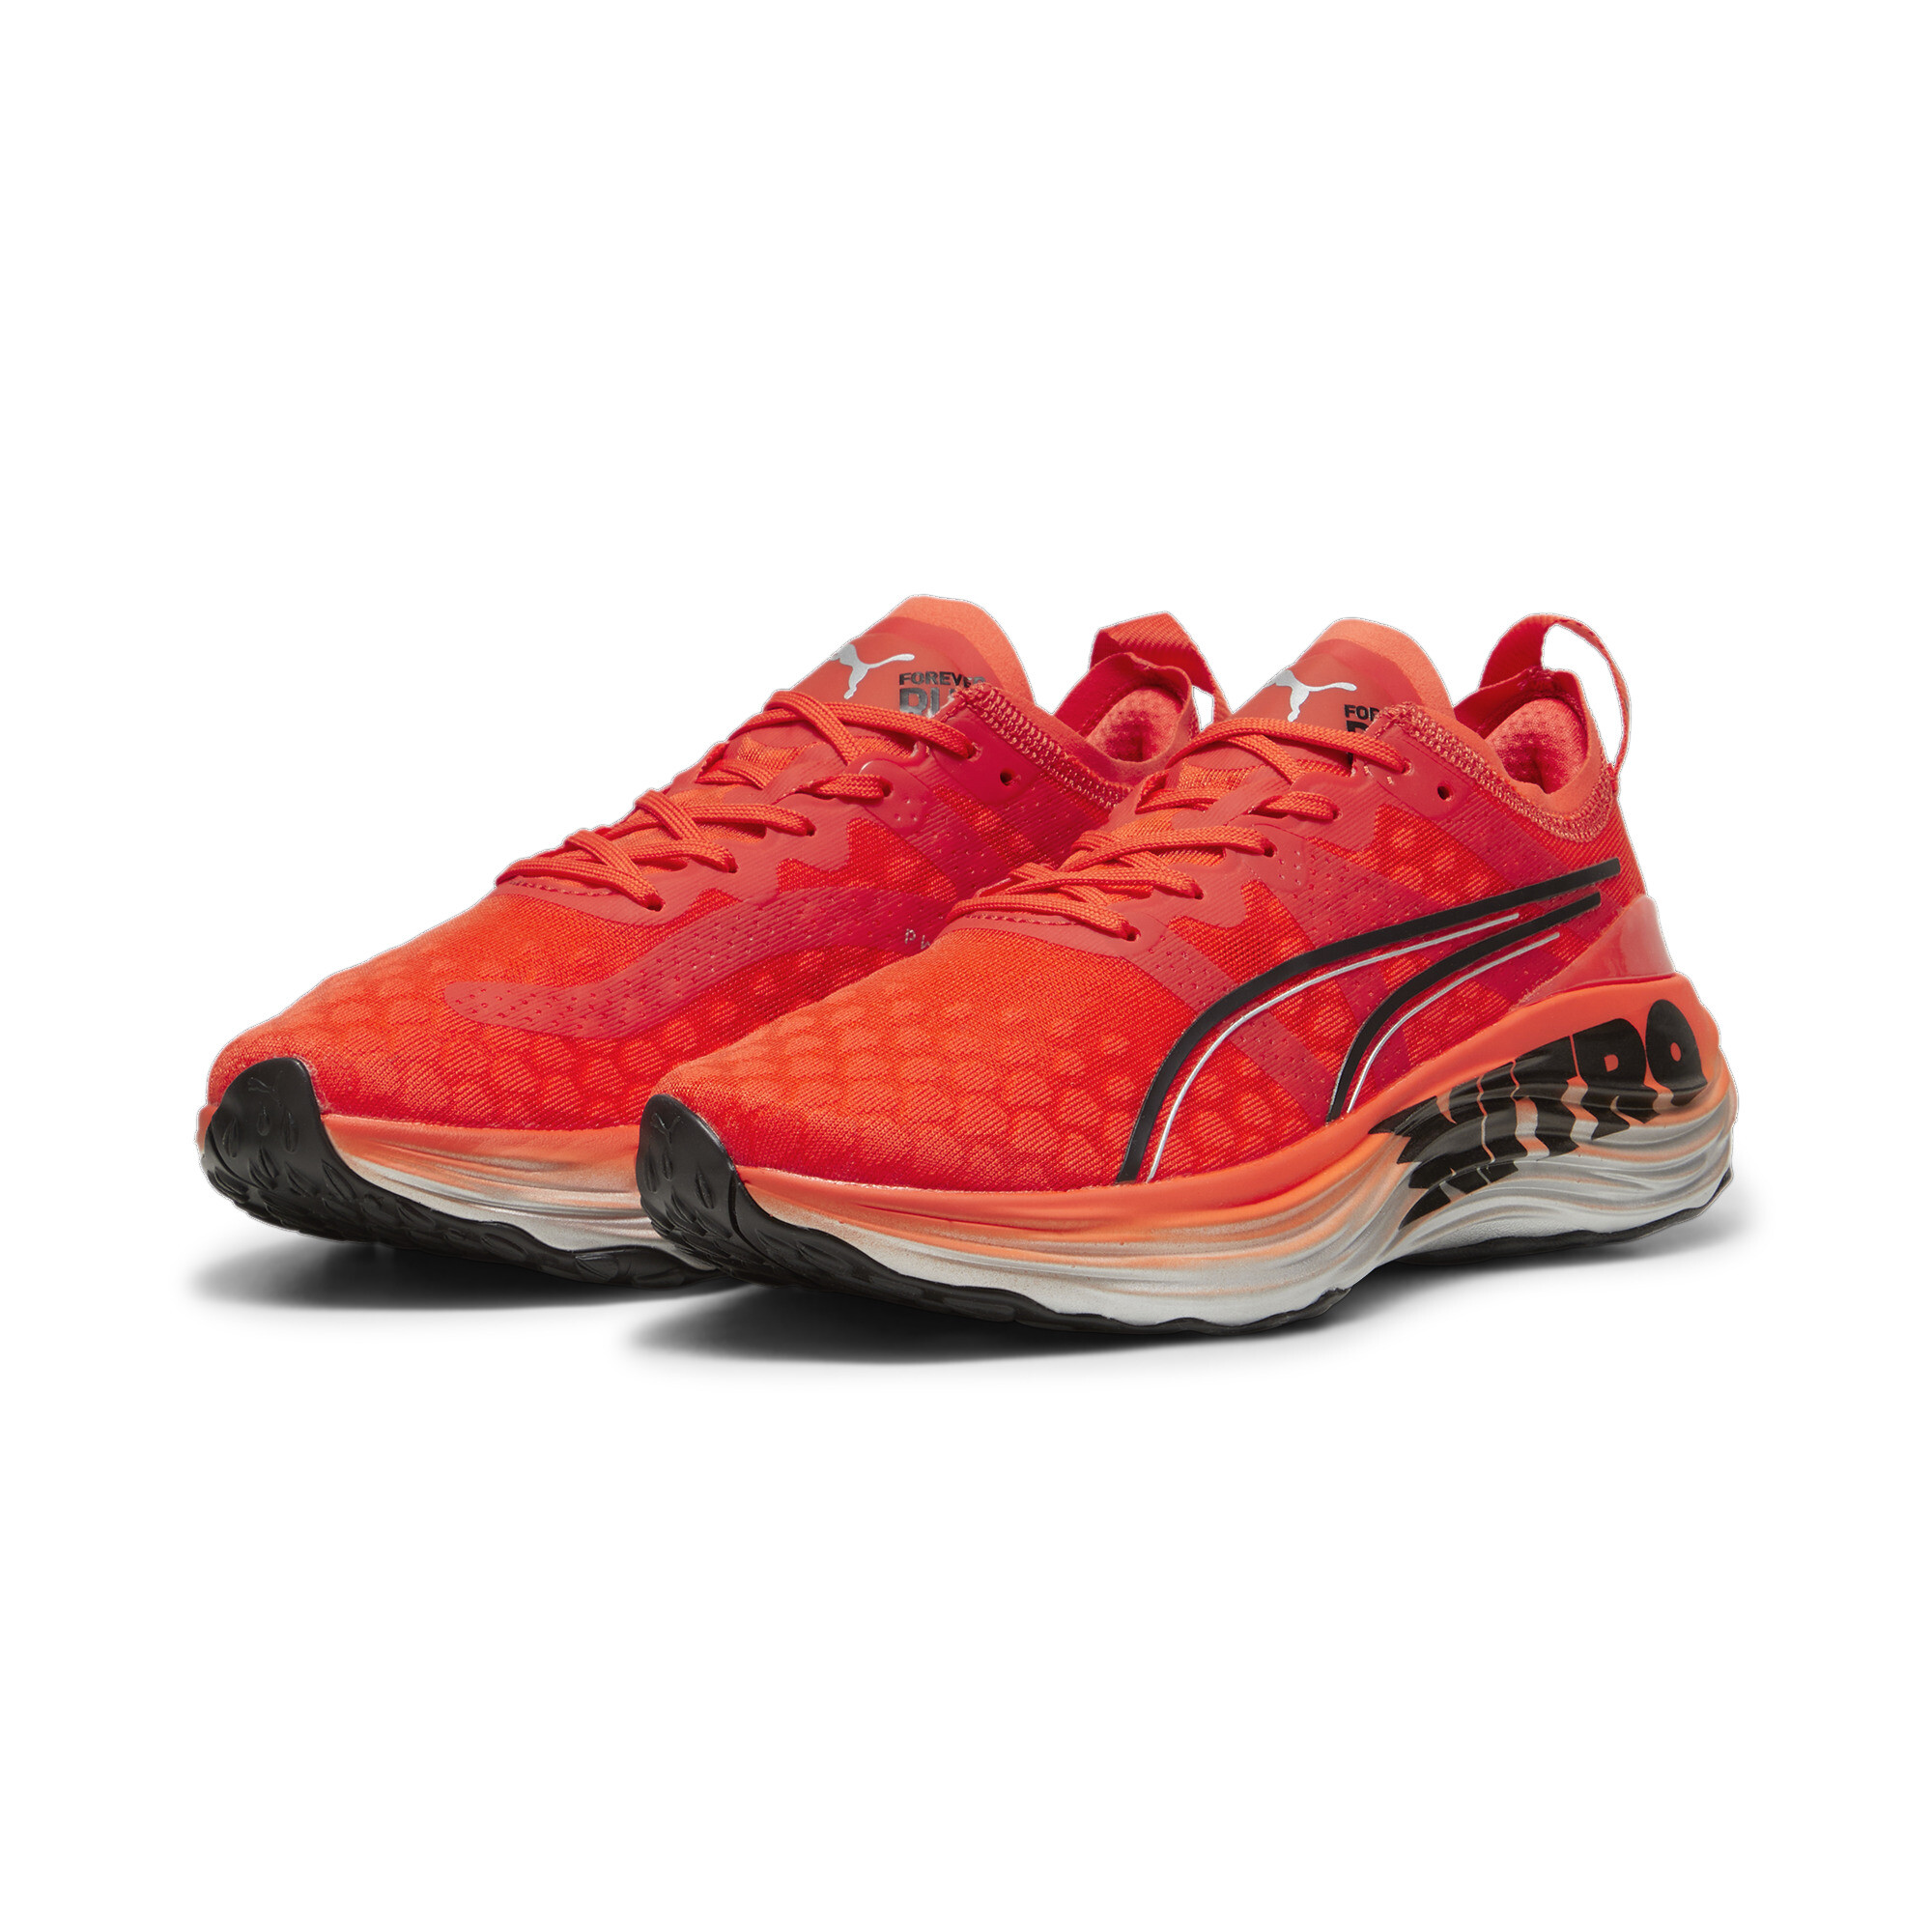 Women's Puma Forever Run NITRO's Running Shoes, Red, Size 38.5, Shoes